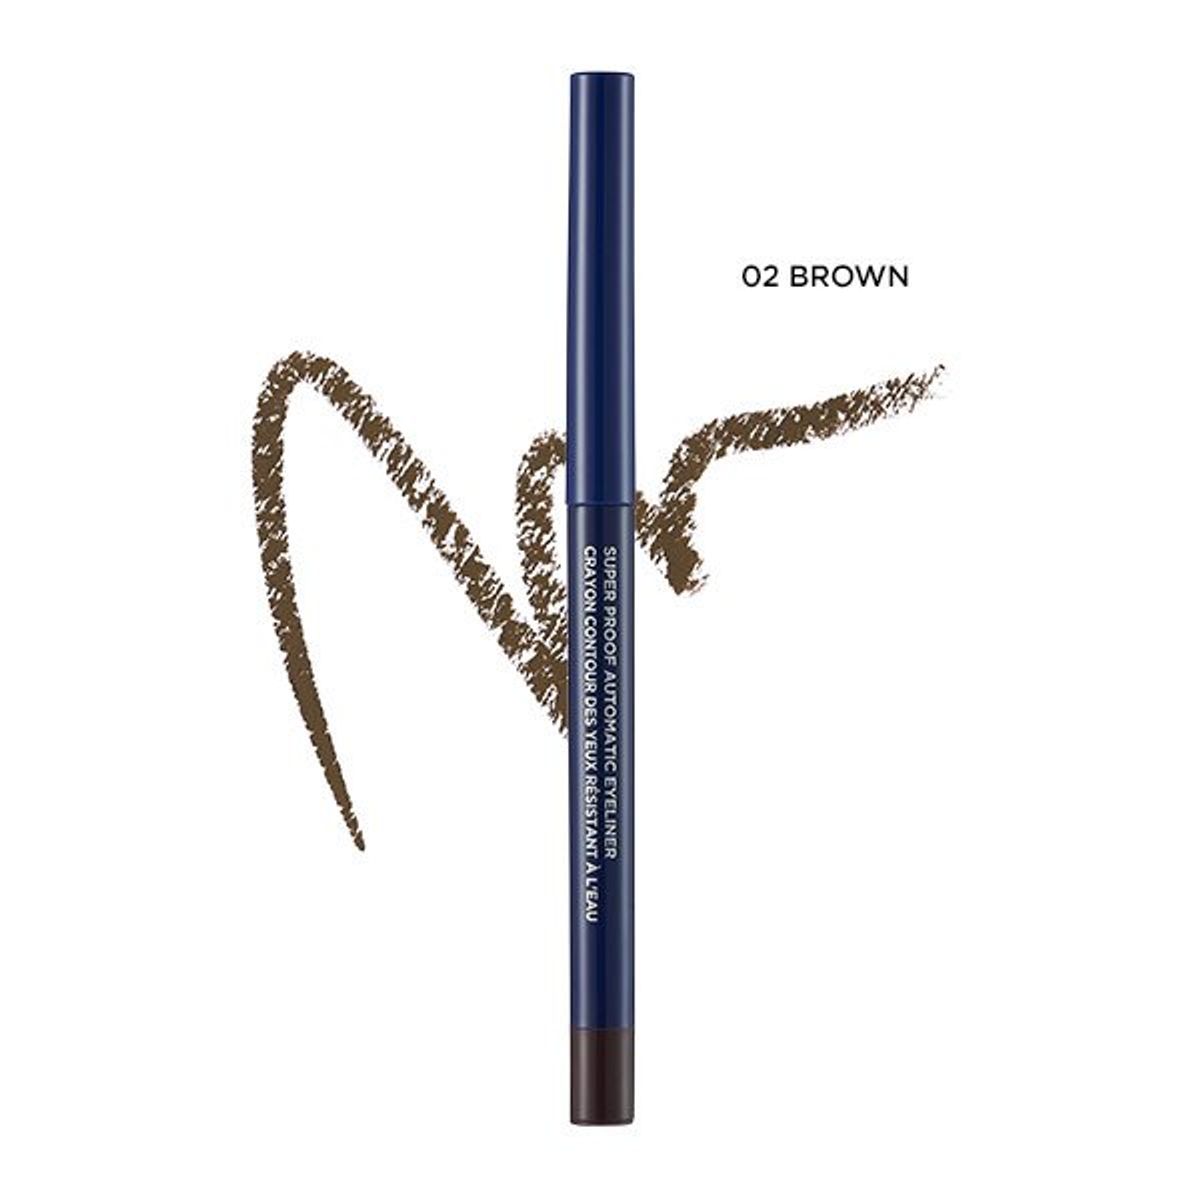 vien-mat-thefaceshop-super-proof-automatic-eyeliner-02-brown-1